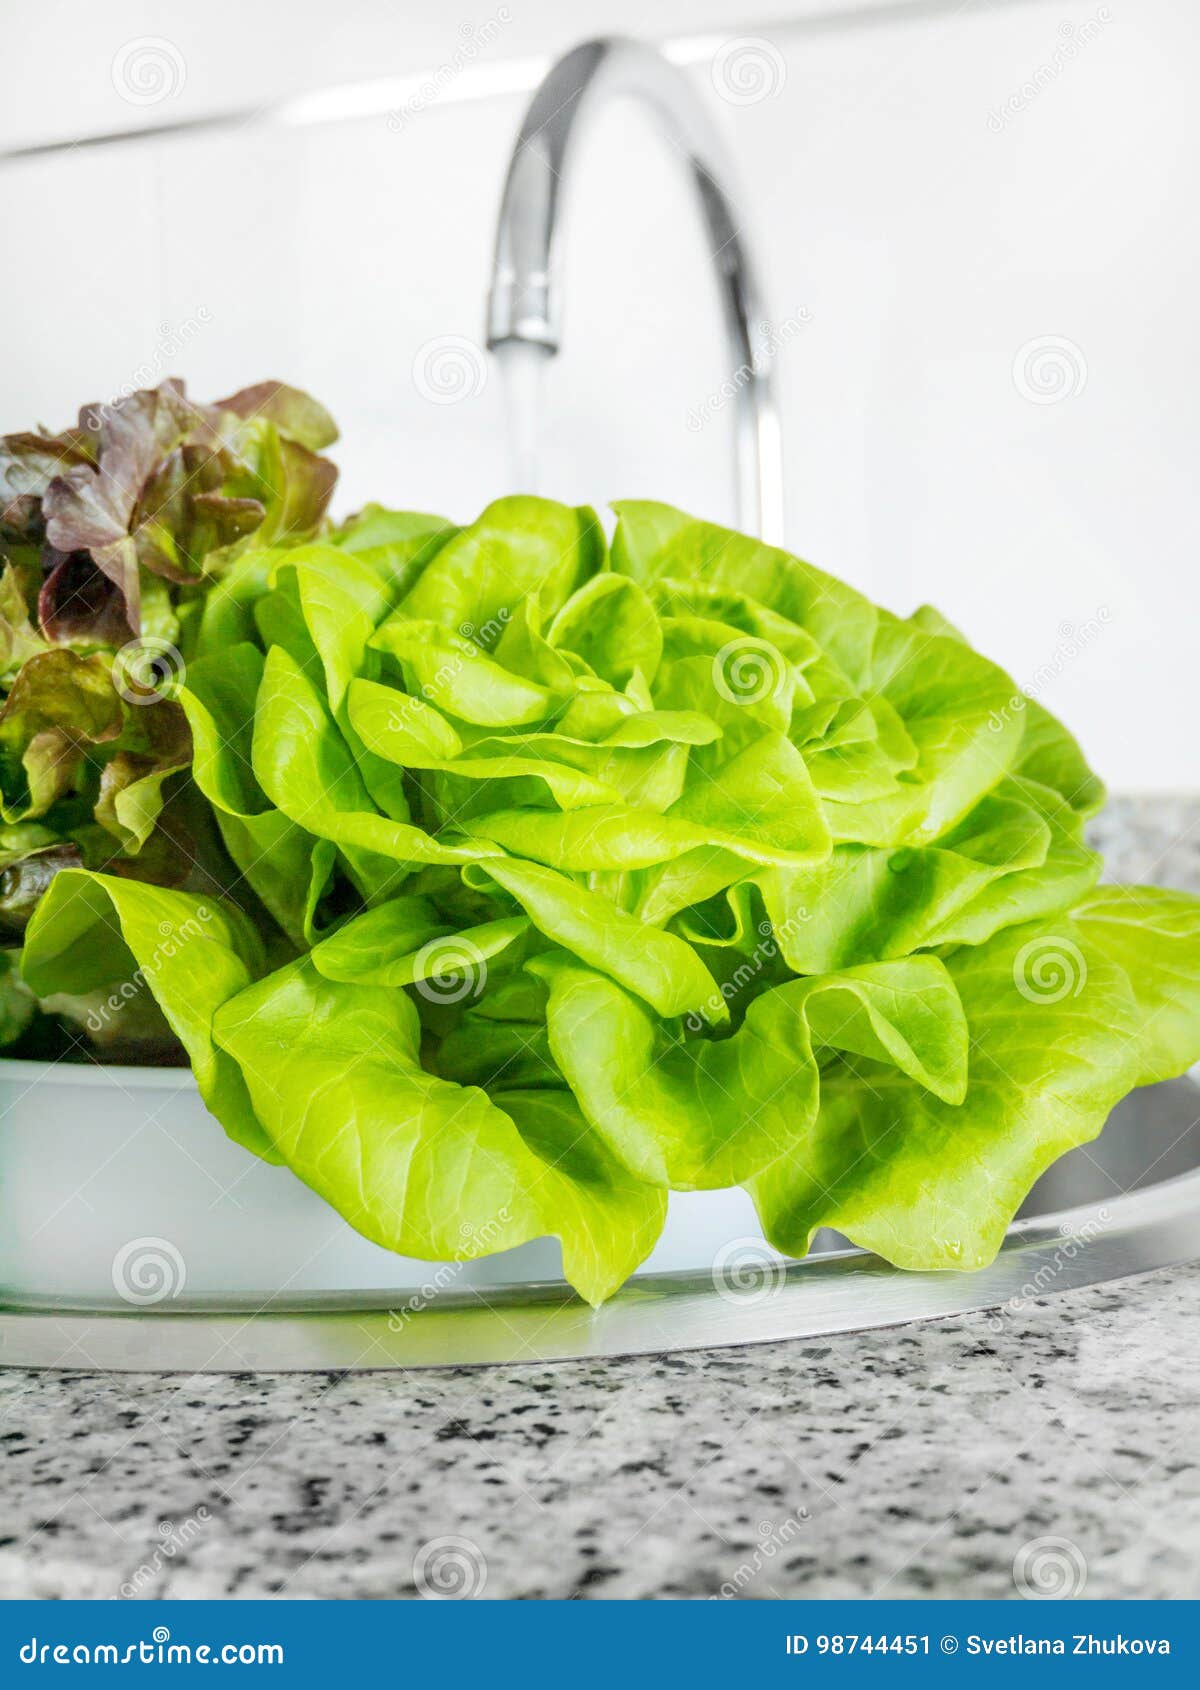 Lettuce Salad Washing in the Kitchen Sink Stock Image - Image of purple ...